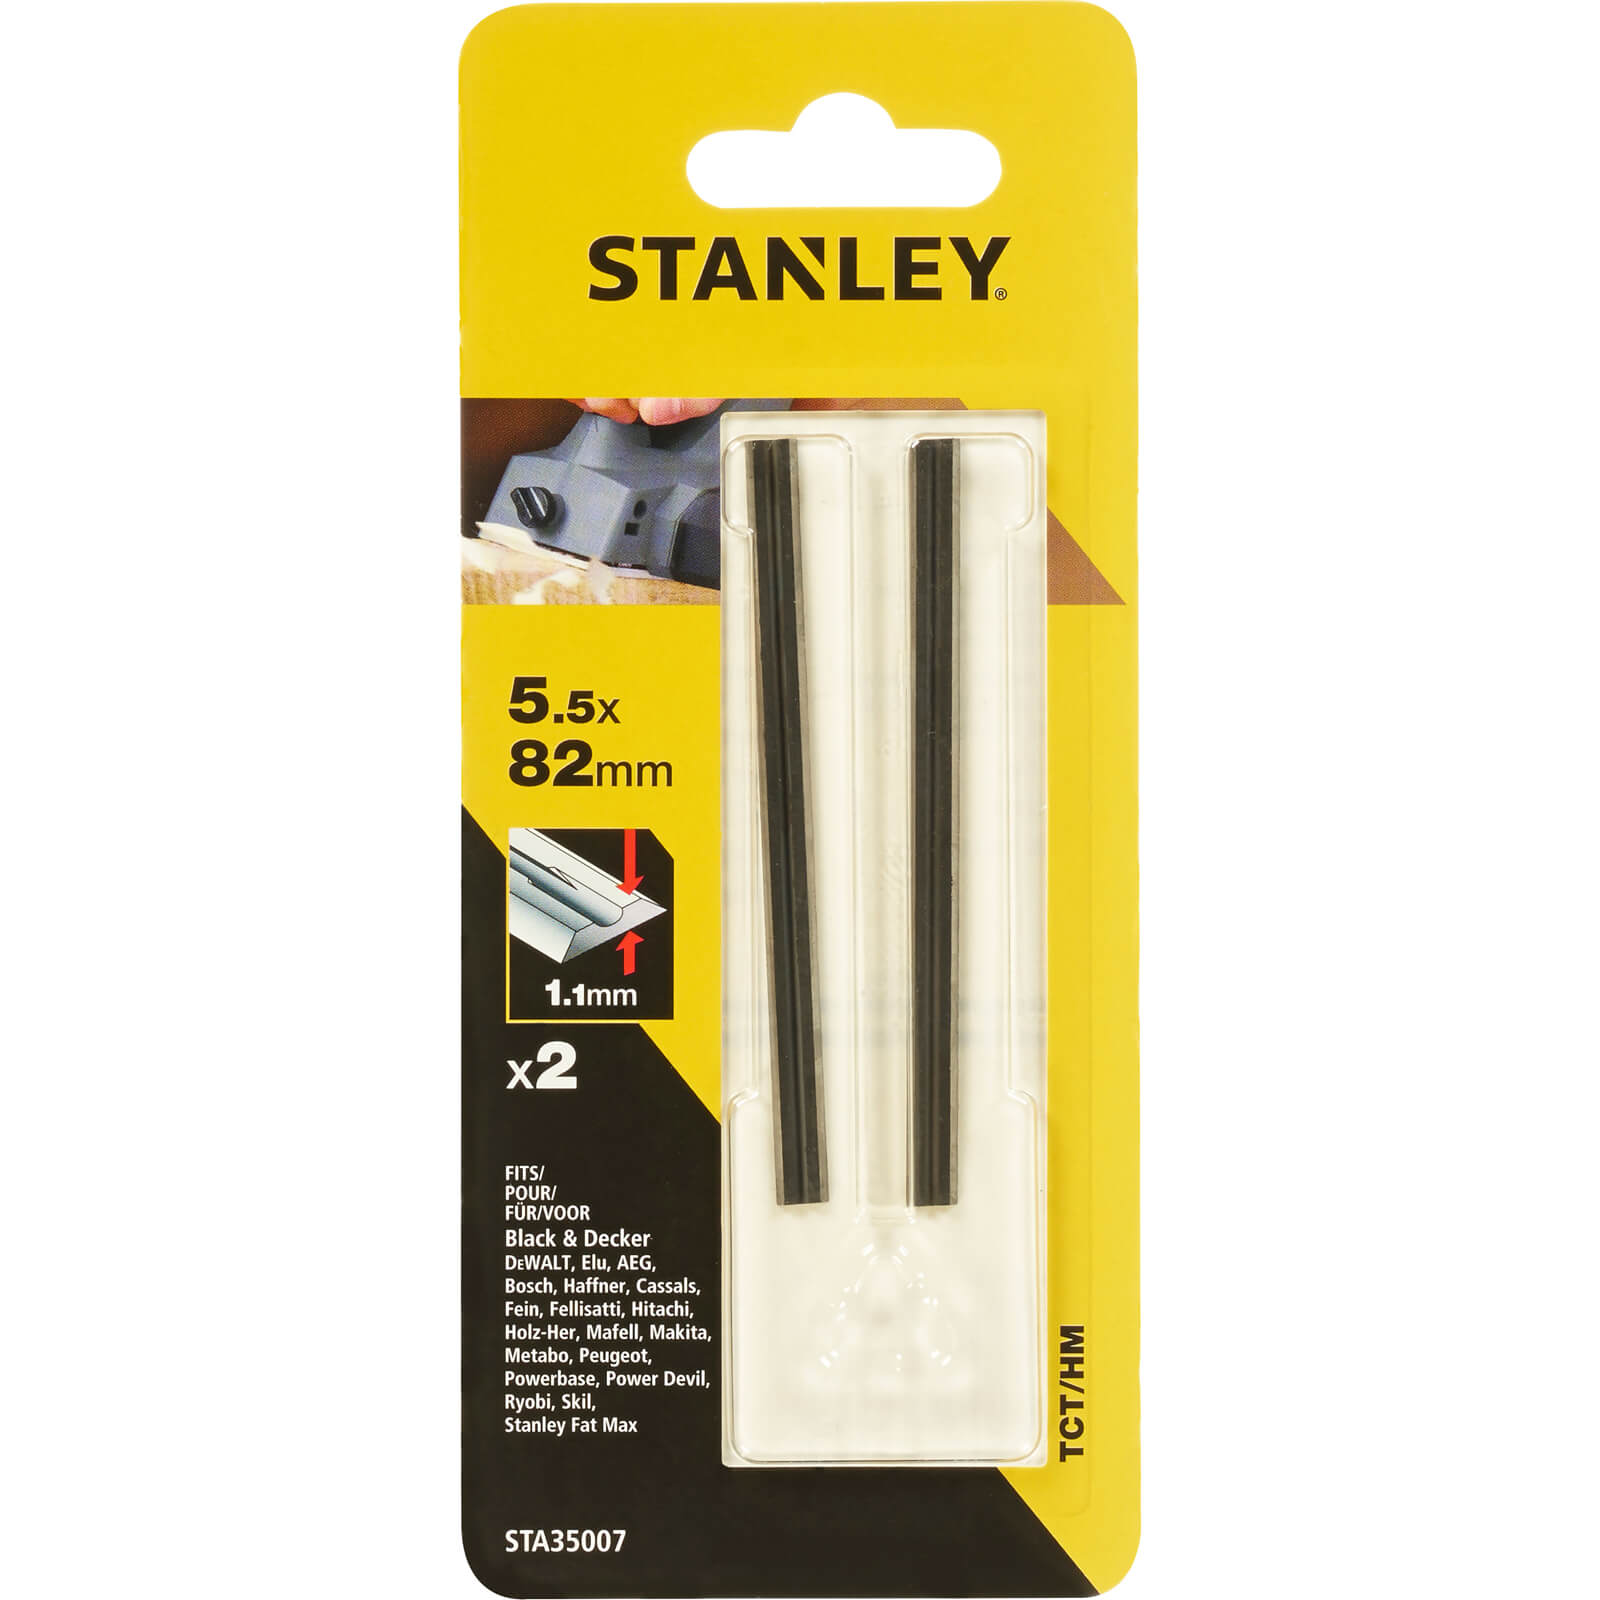 Photos - Power Tool Accessory Stanley TCT Planer Blades 82mm Pack of 2 STA35007 